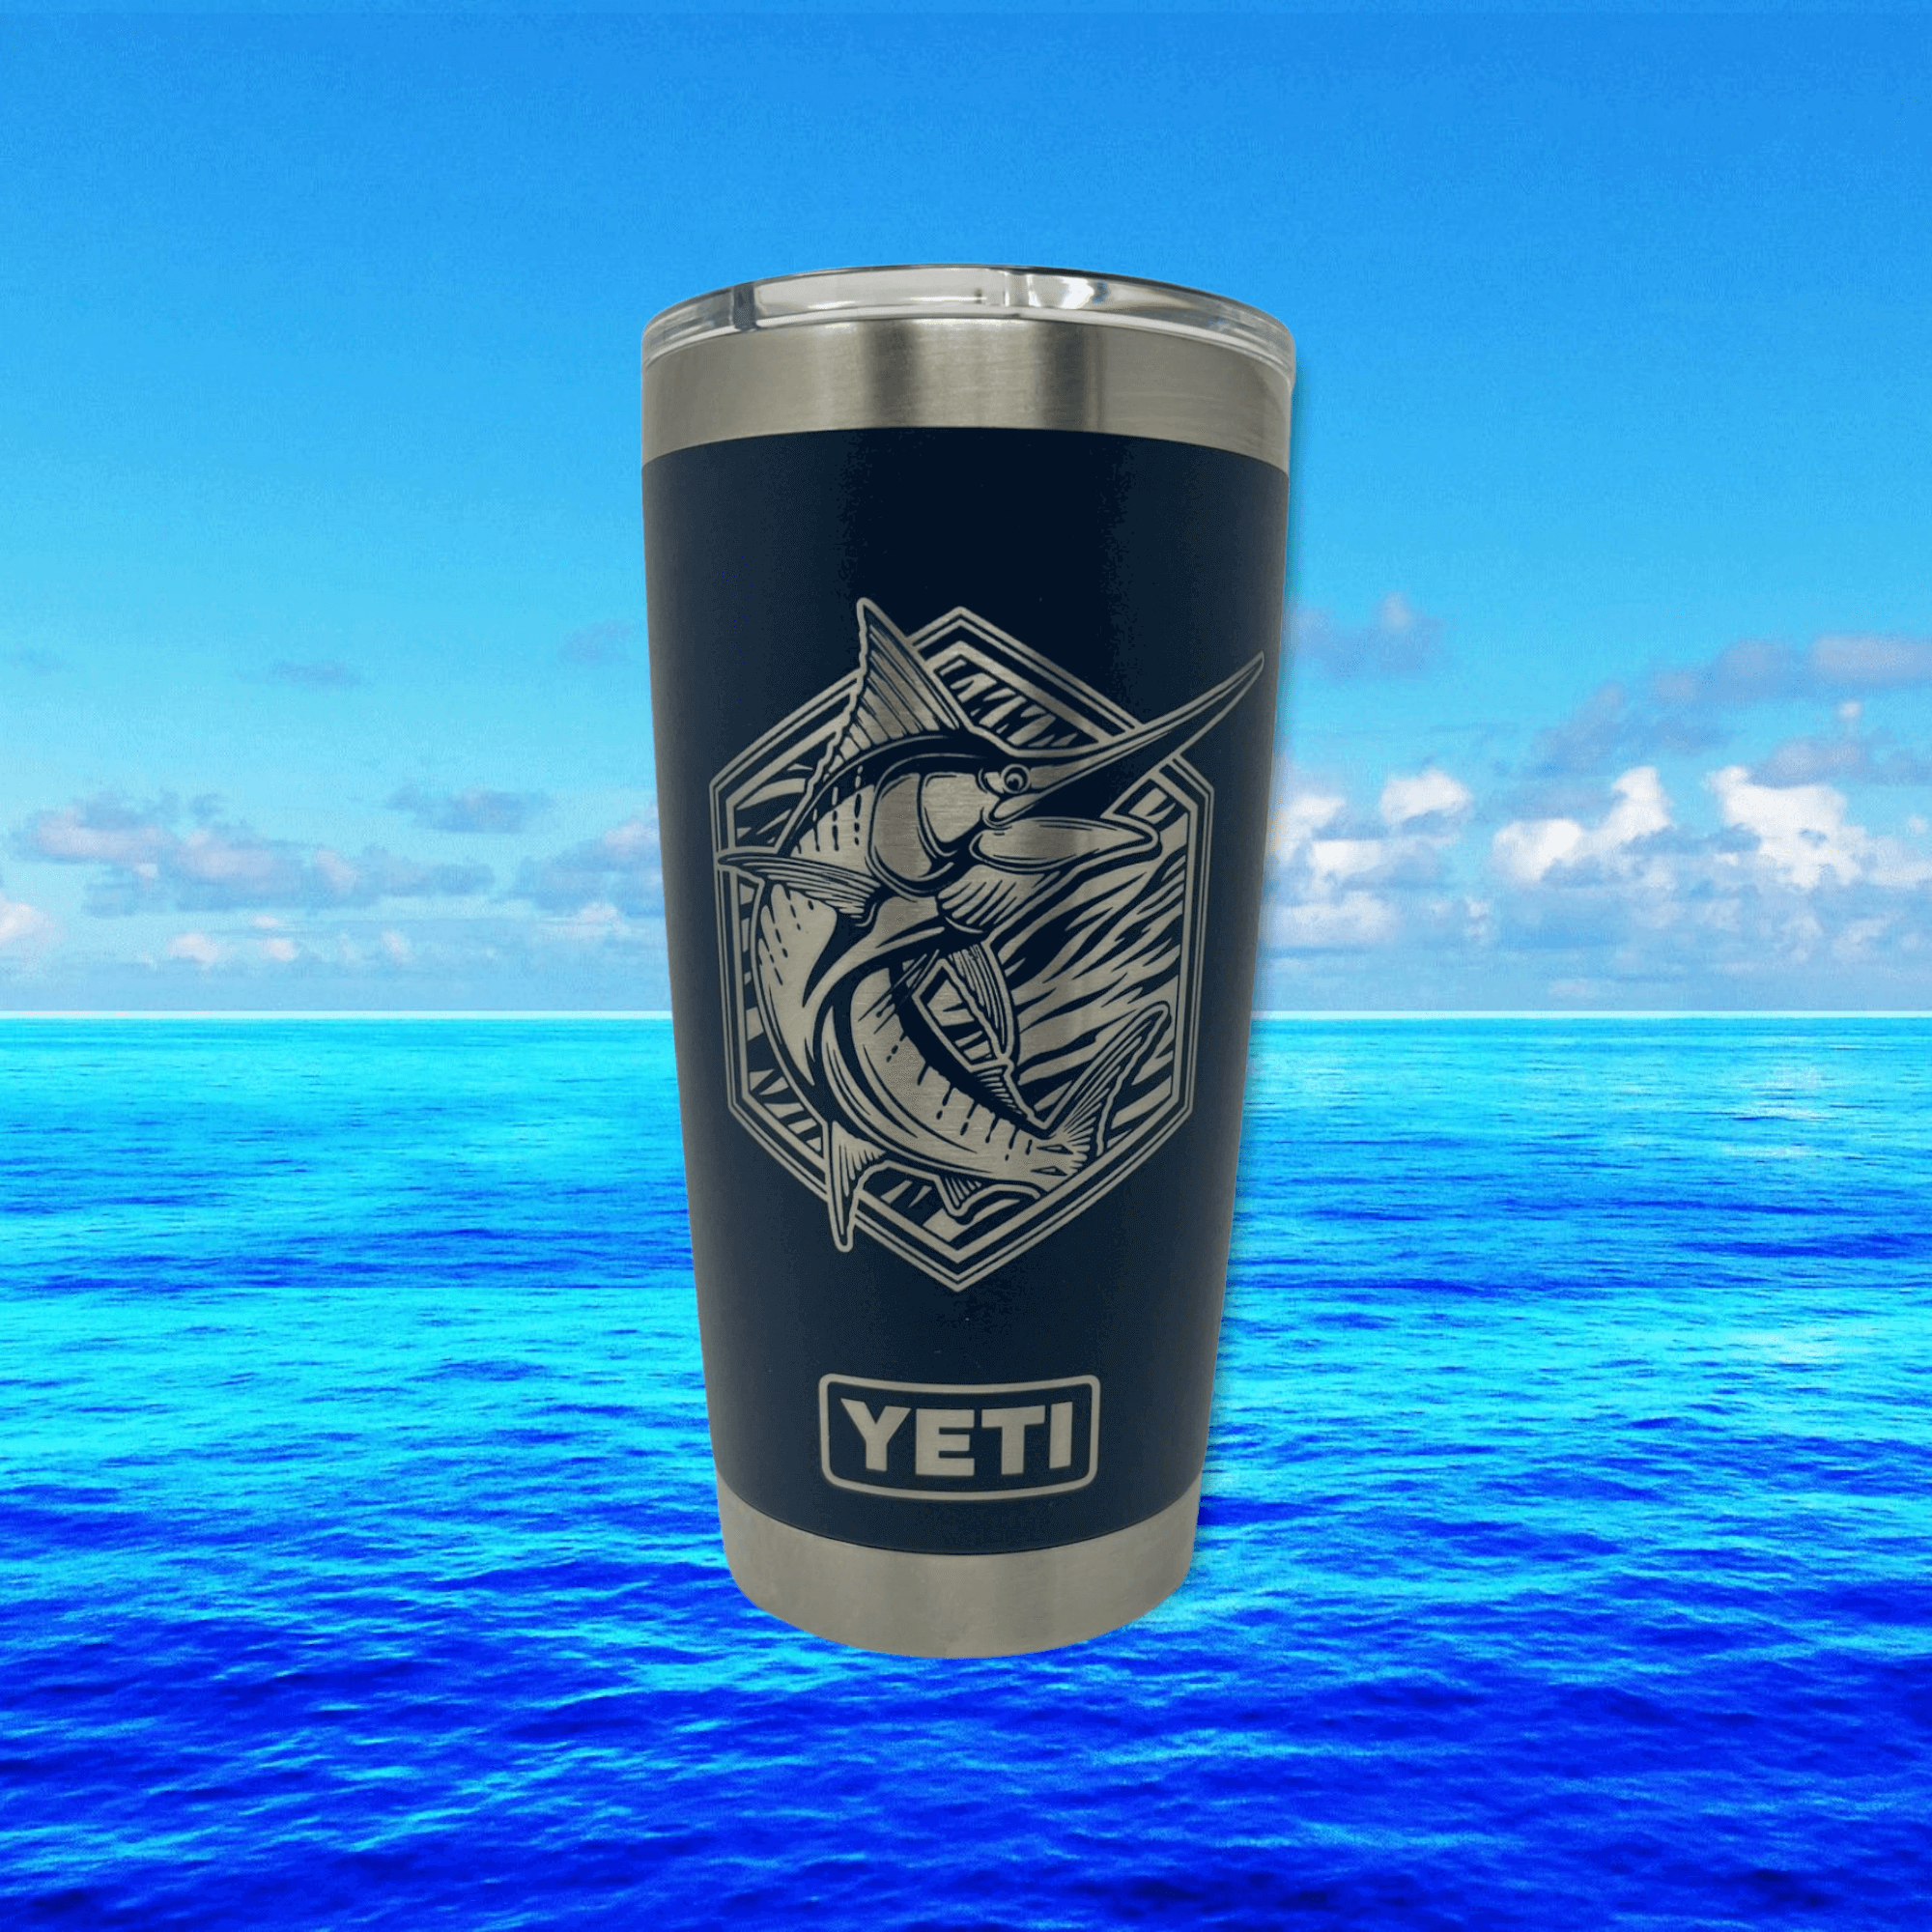 Marlin offshore fishing artwork by Joel Jensen Art laser engraved - silver on black Yeti tumbler with ocean water background.  Wind River Outpost